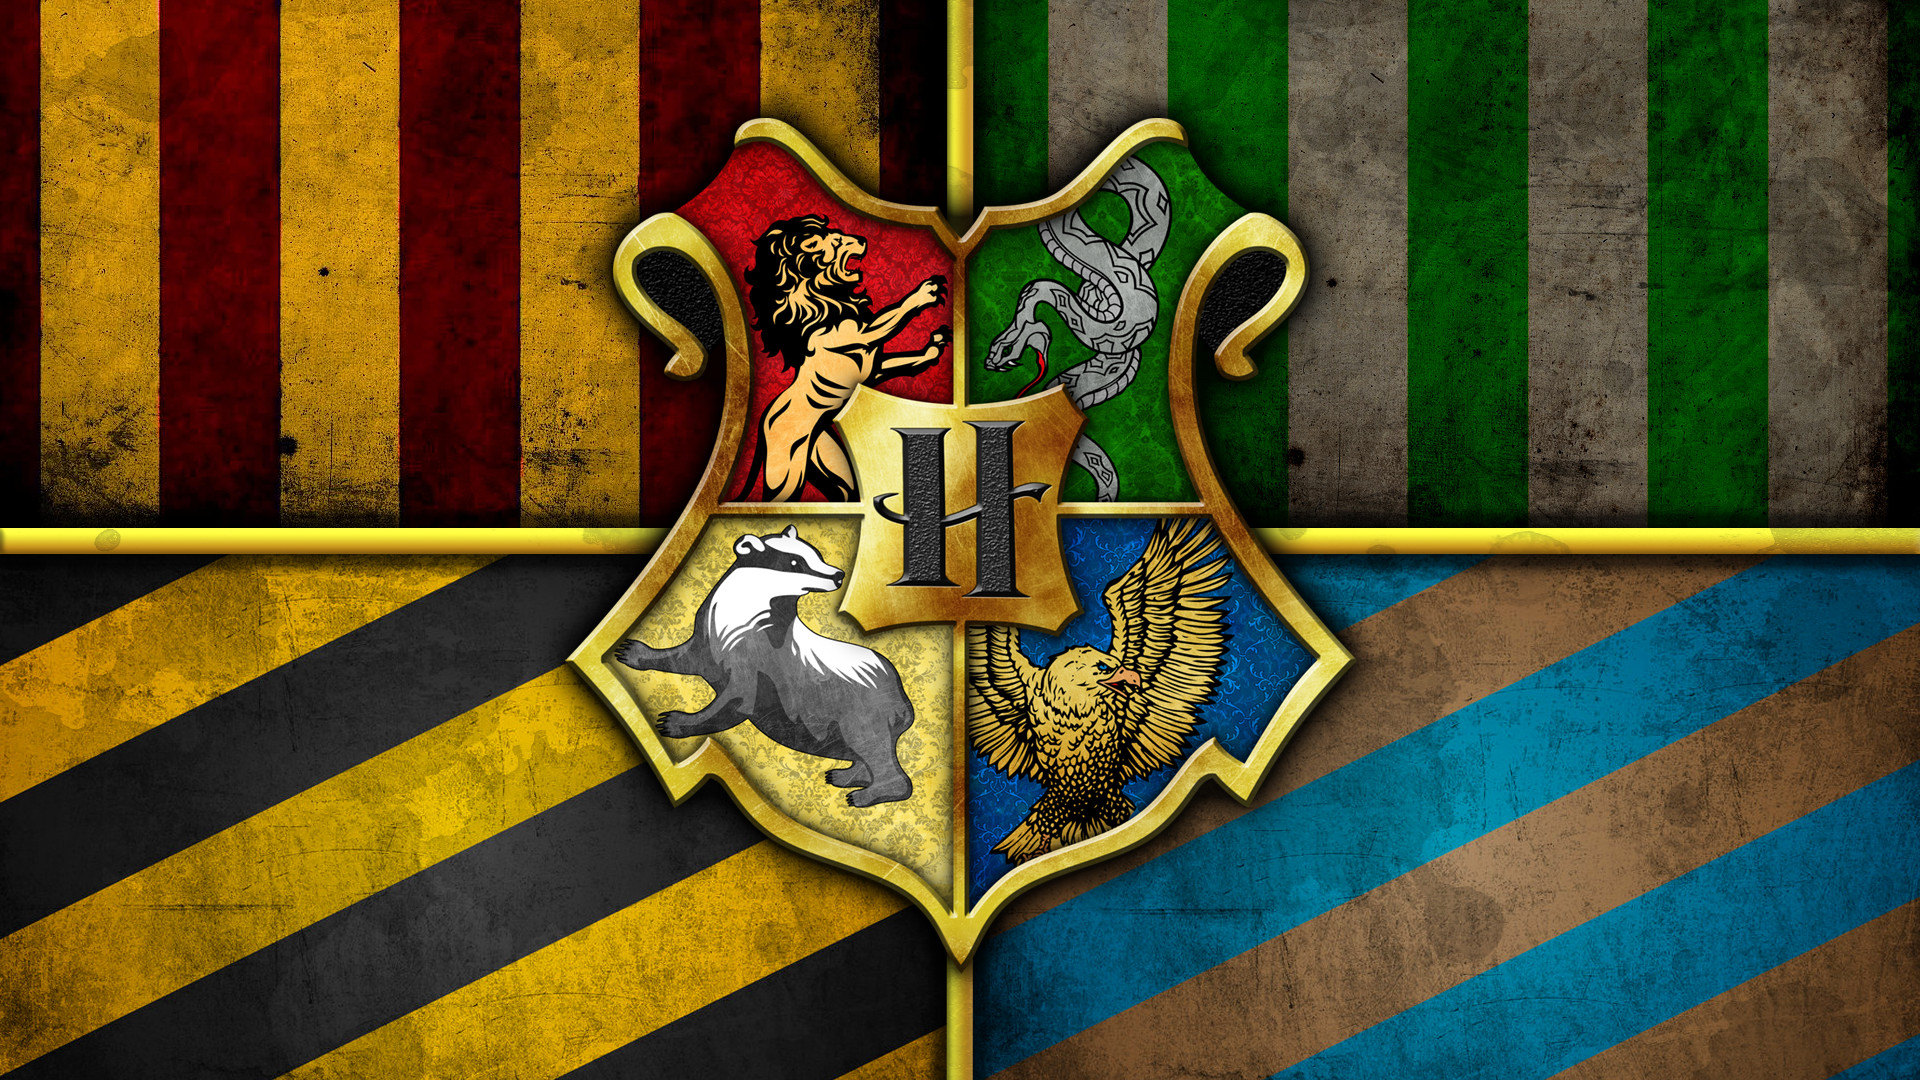 Which Hogwarts class would you like to take?